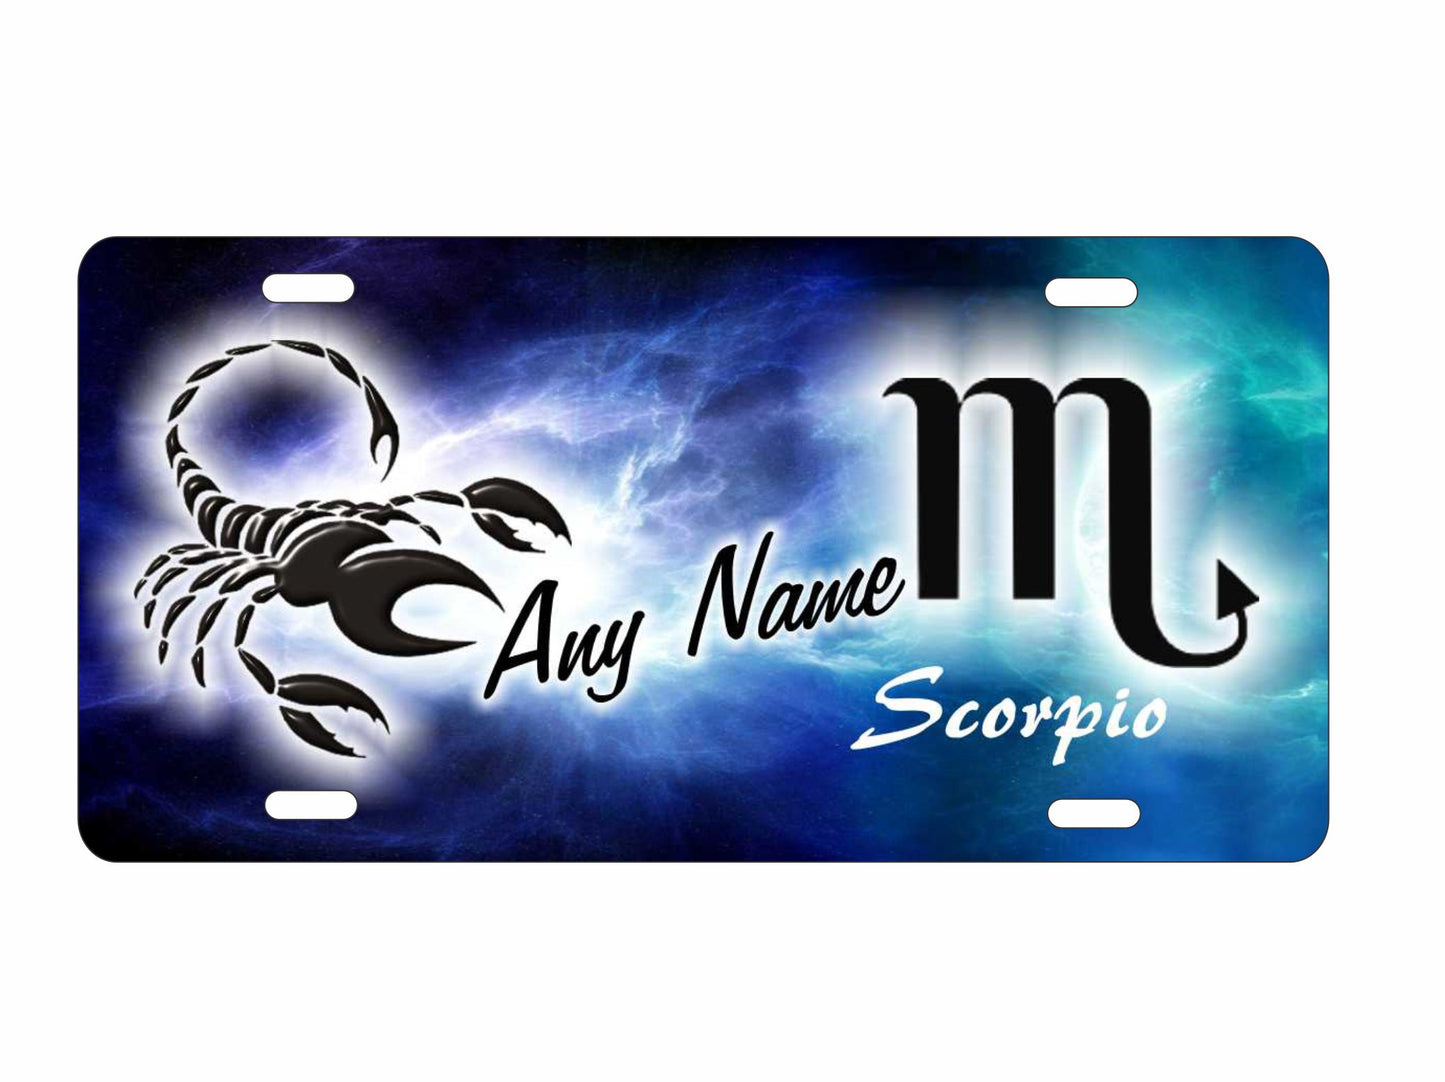 Scorpio zodiac symbol Astrological sign personalized novelty decorative front license plate